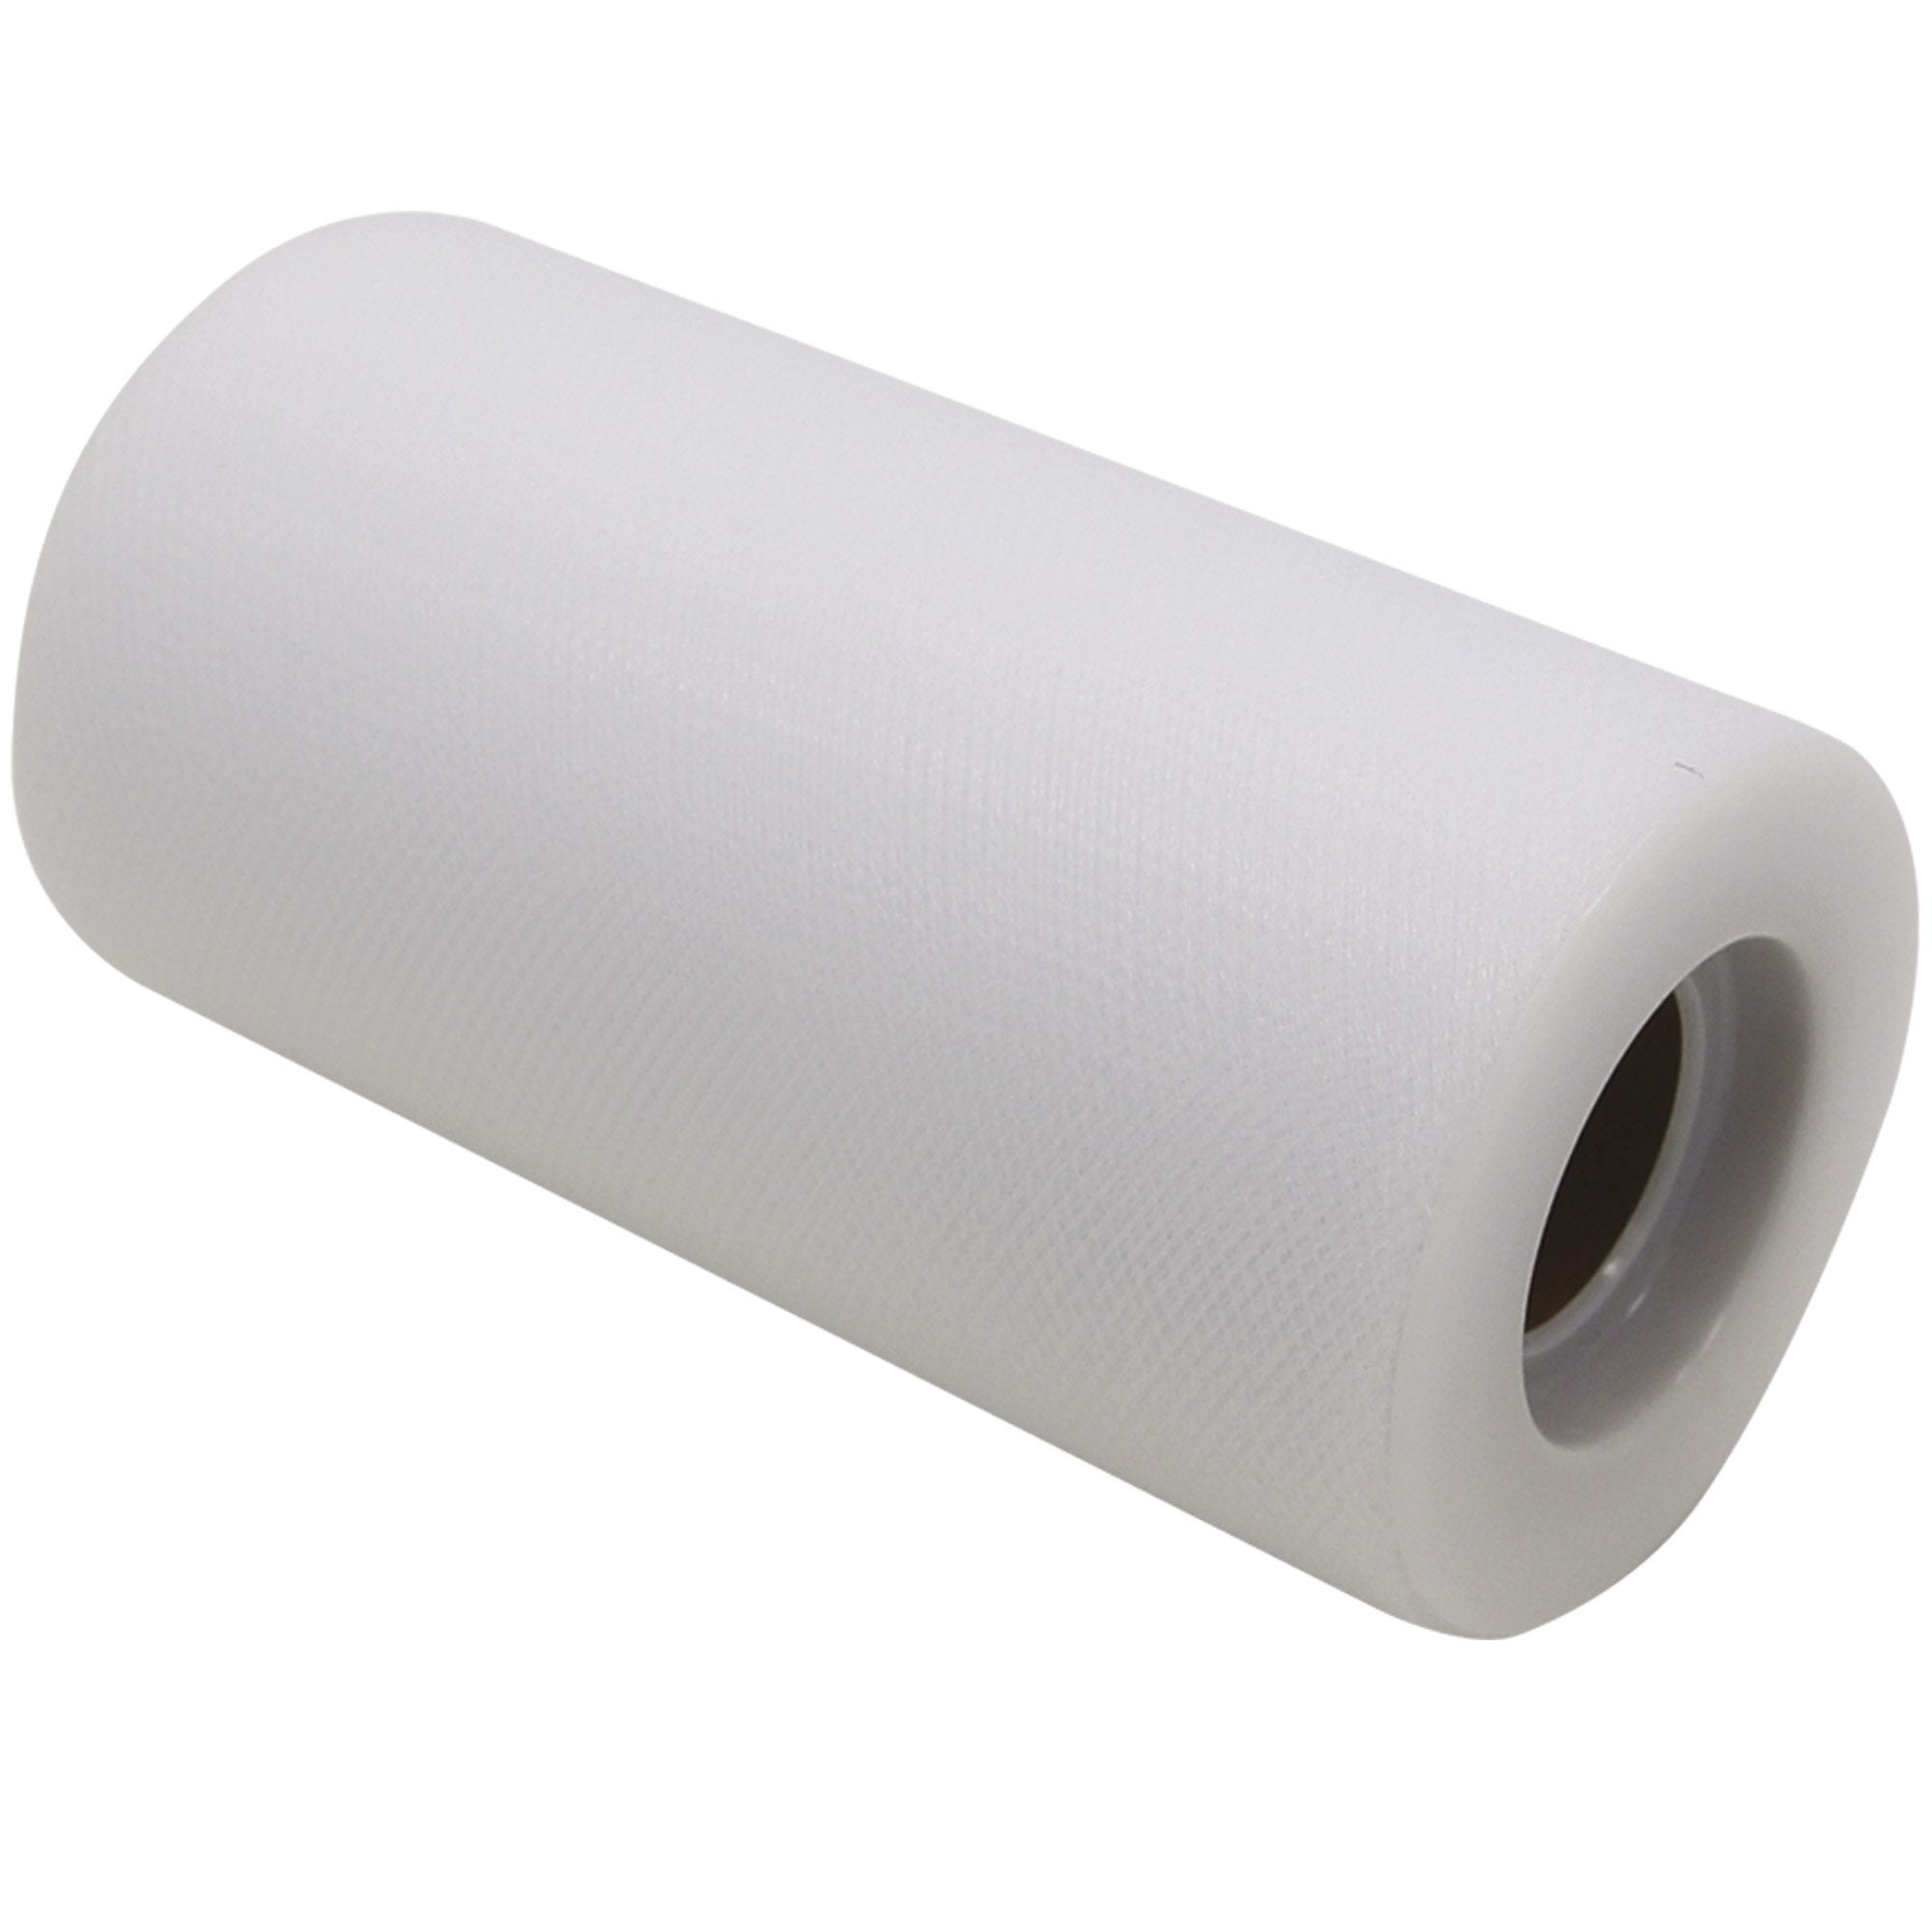 big-party-tulle-rotolo-12-5cmx25mt-bianco